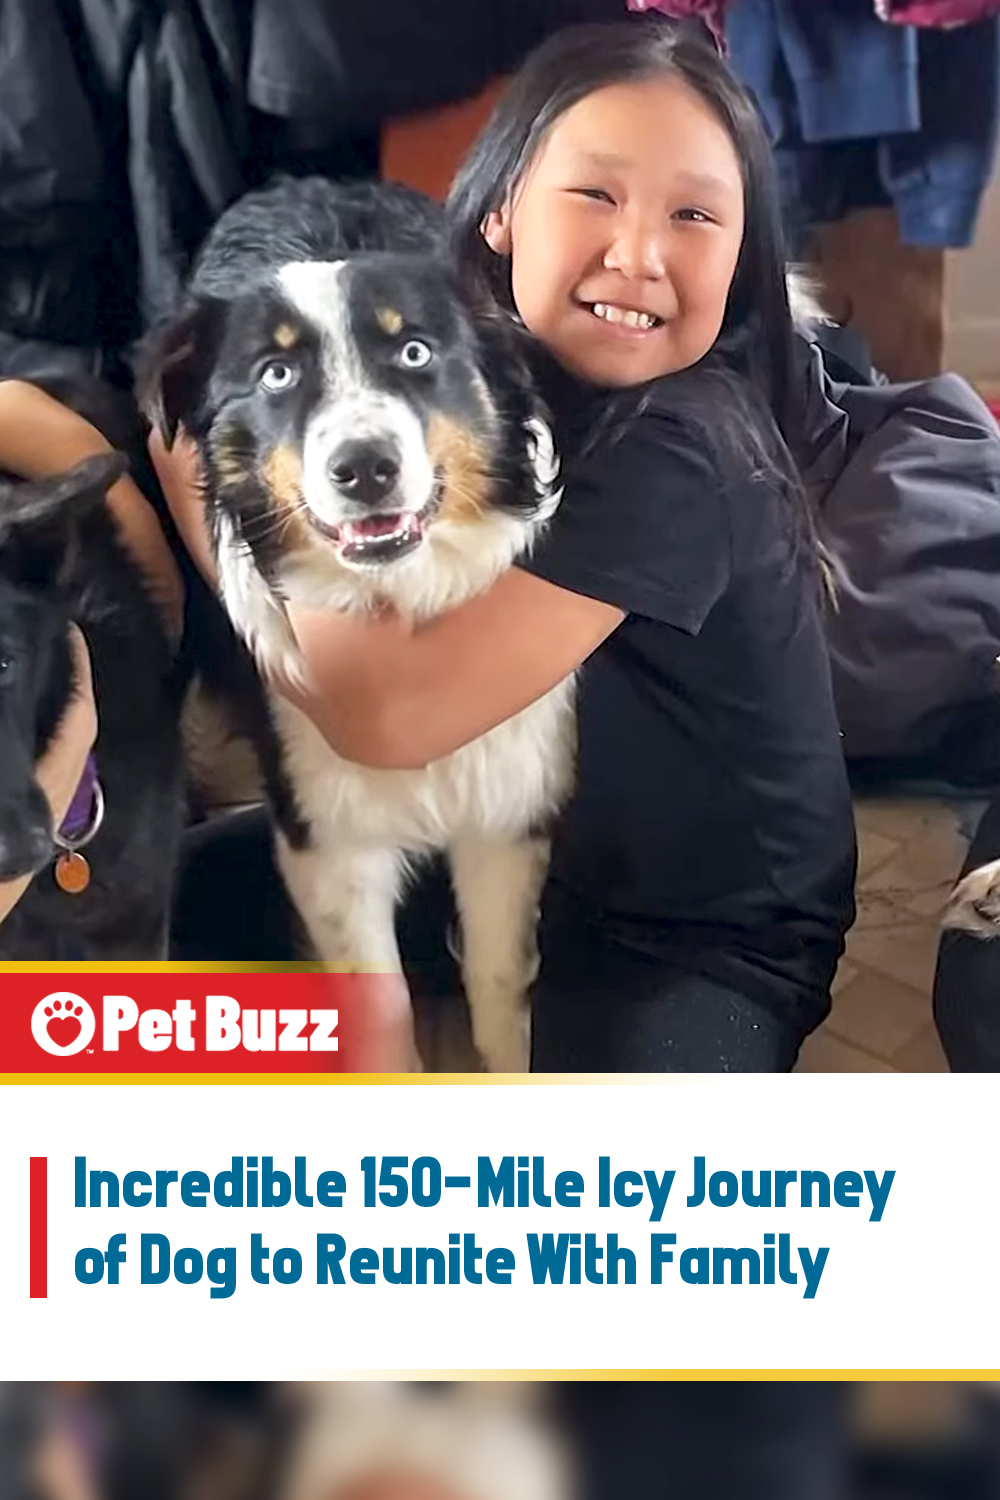 Incredible 150-Mile Icy Journey of Dog to Reunite With Family